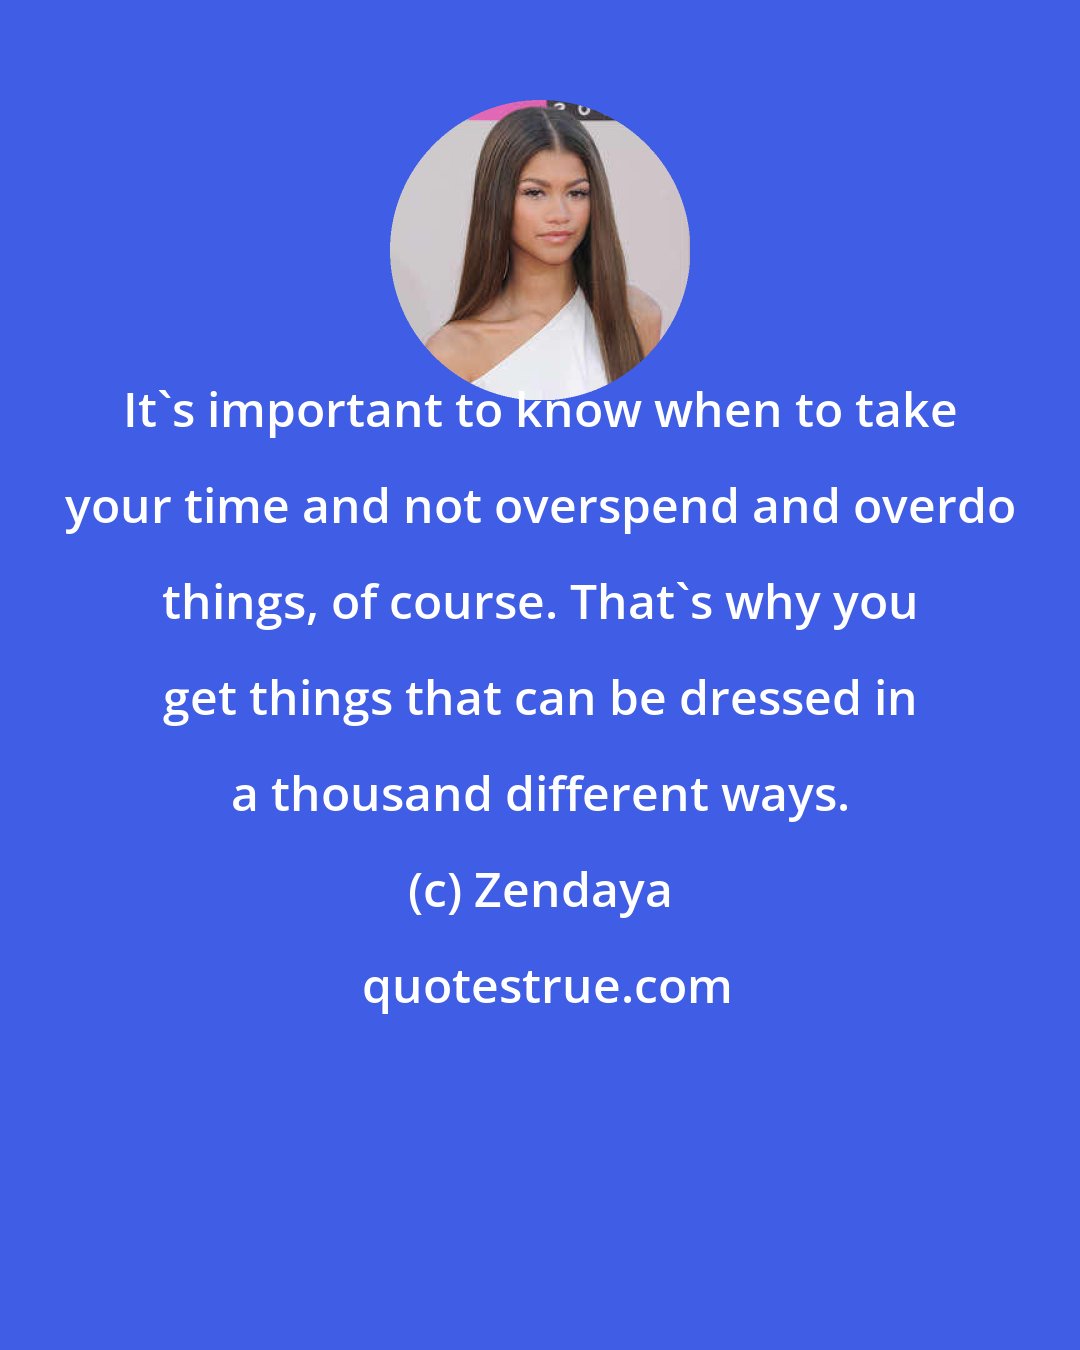 Zendaya: It's important to know when to take your time and not overspend and overdo things, of course. That's why you get things that can be dressed in a thousand different ways.